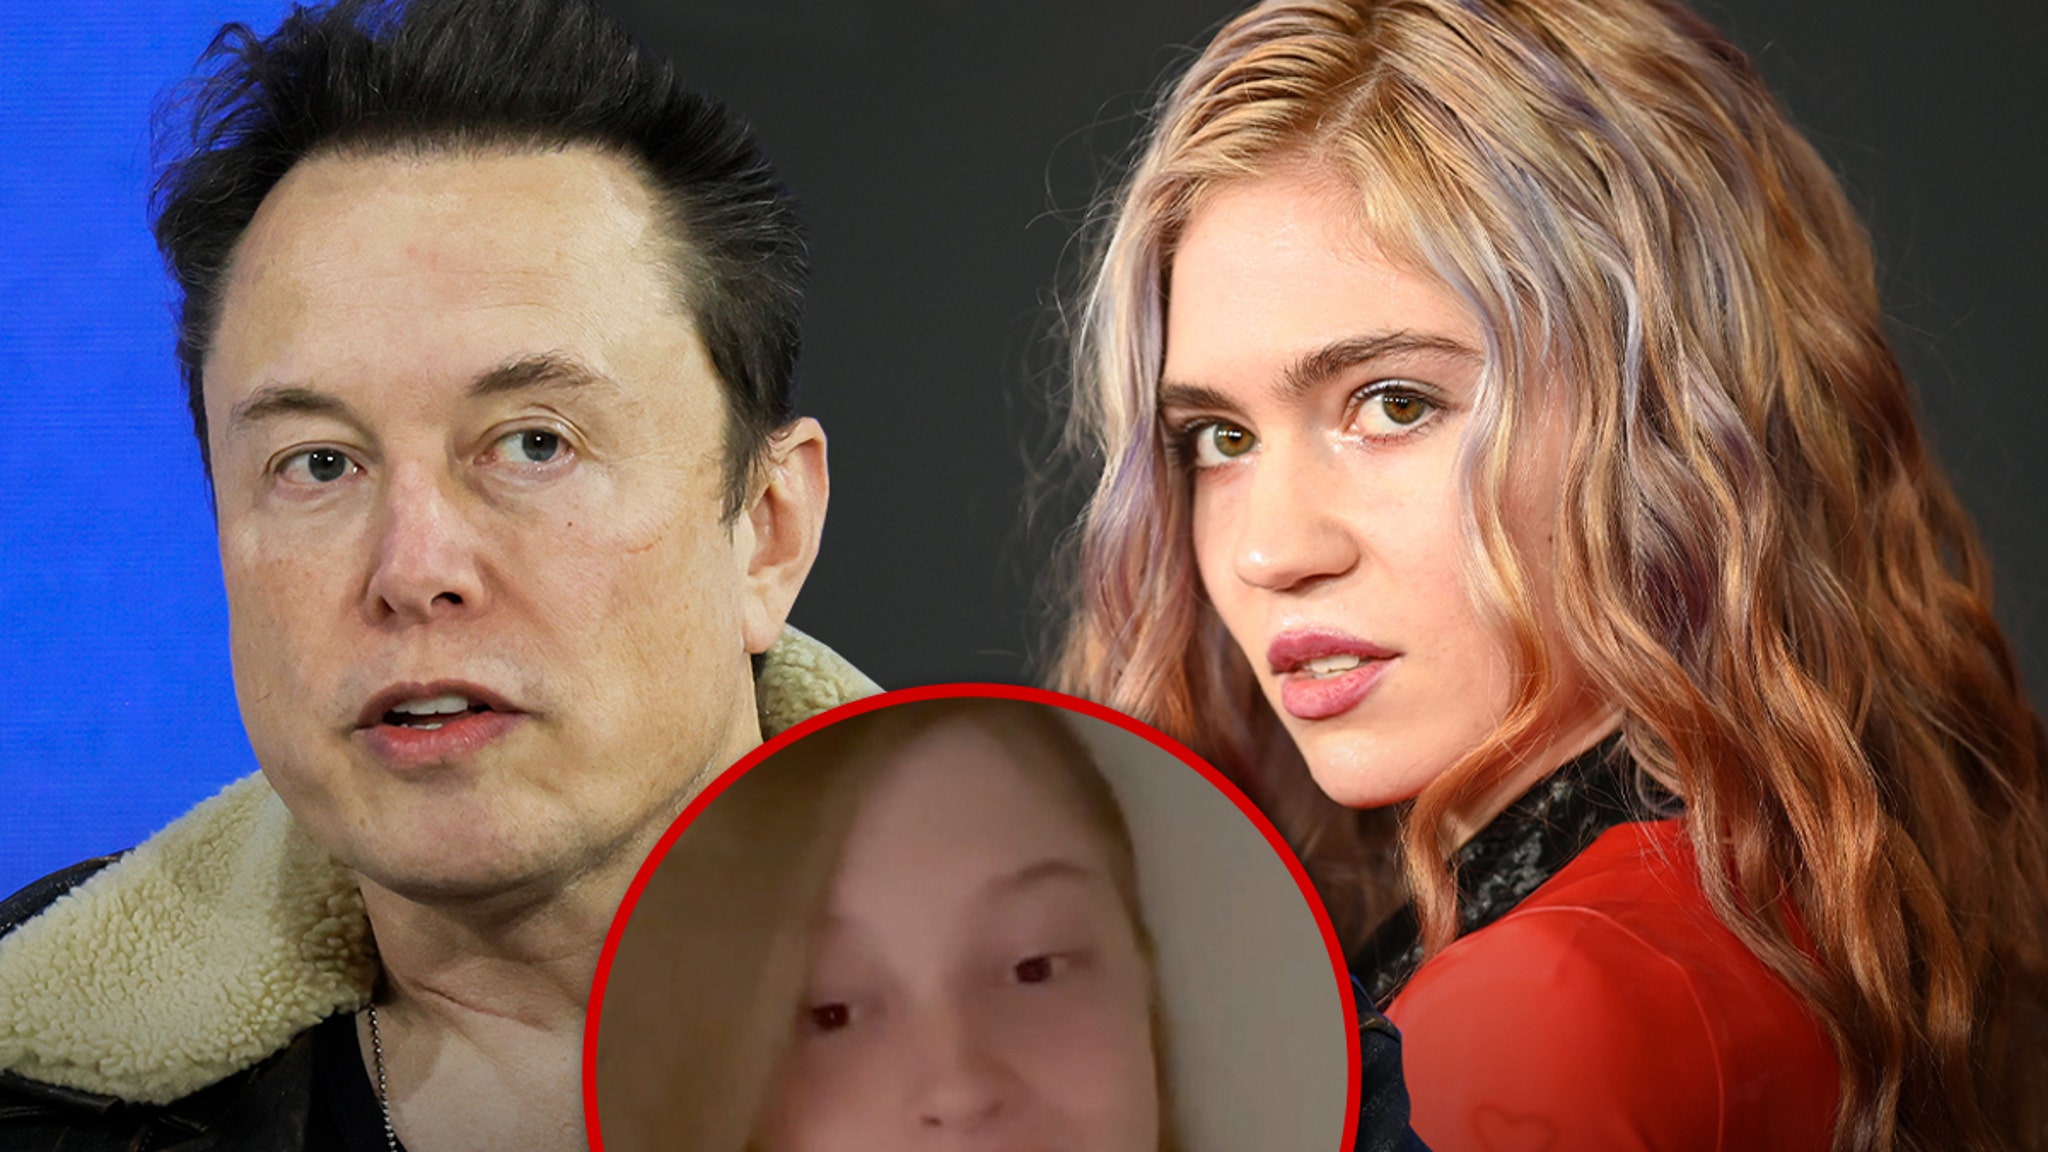 Elon Musk’s Ex Grimes Sides With His Transgender Daughter in Public Feud